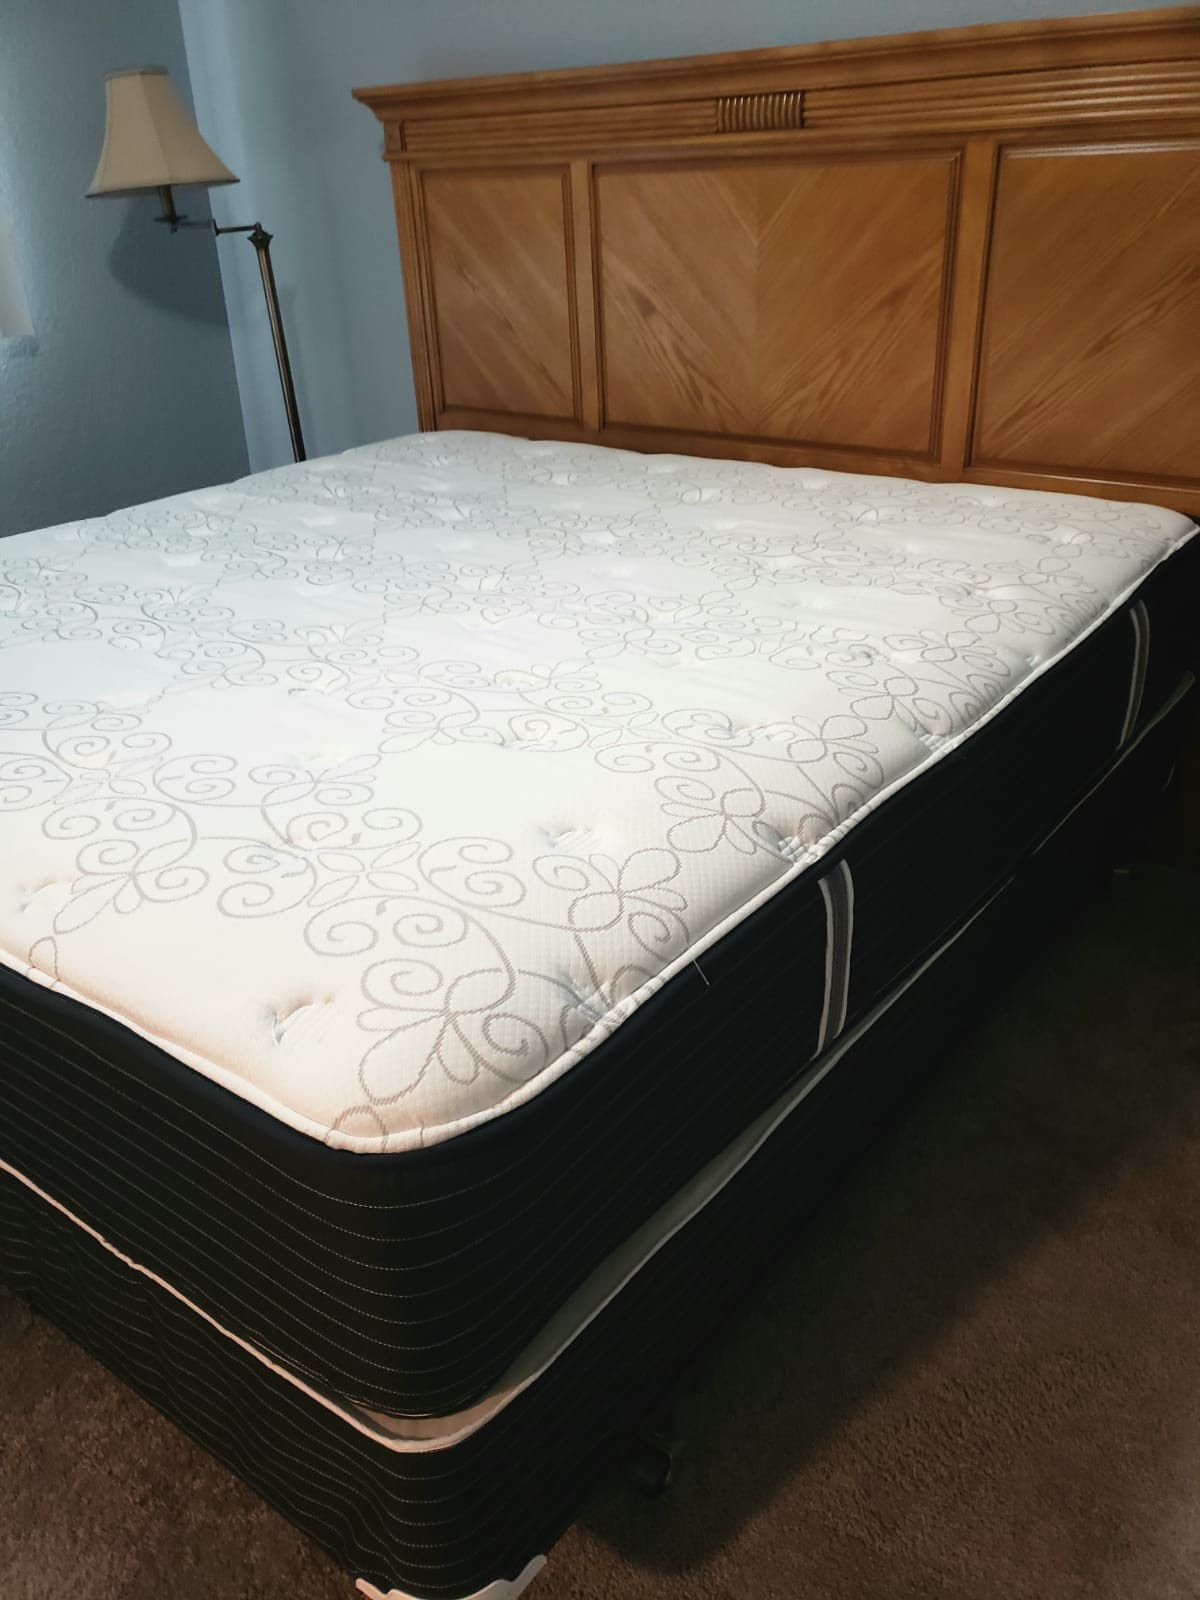 New KING size mattress, & BOX spring. Bed frame not included on offer